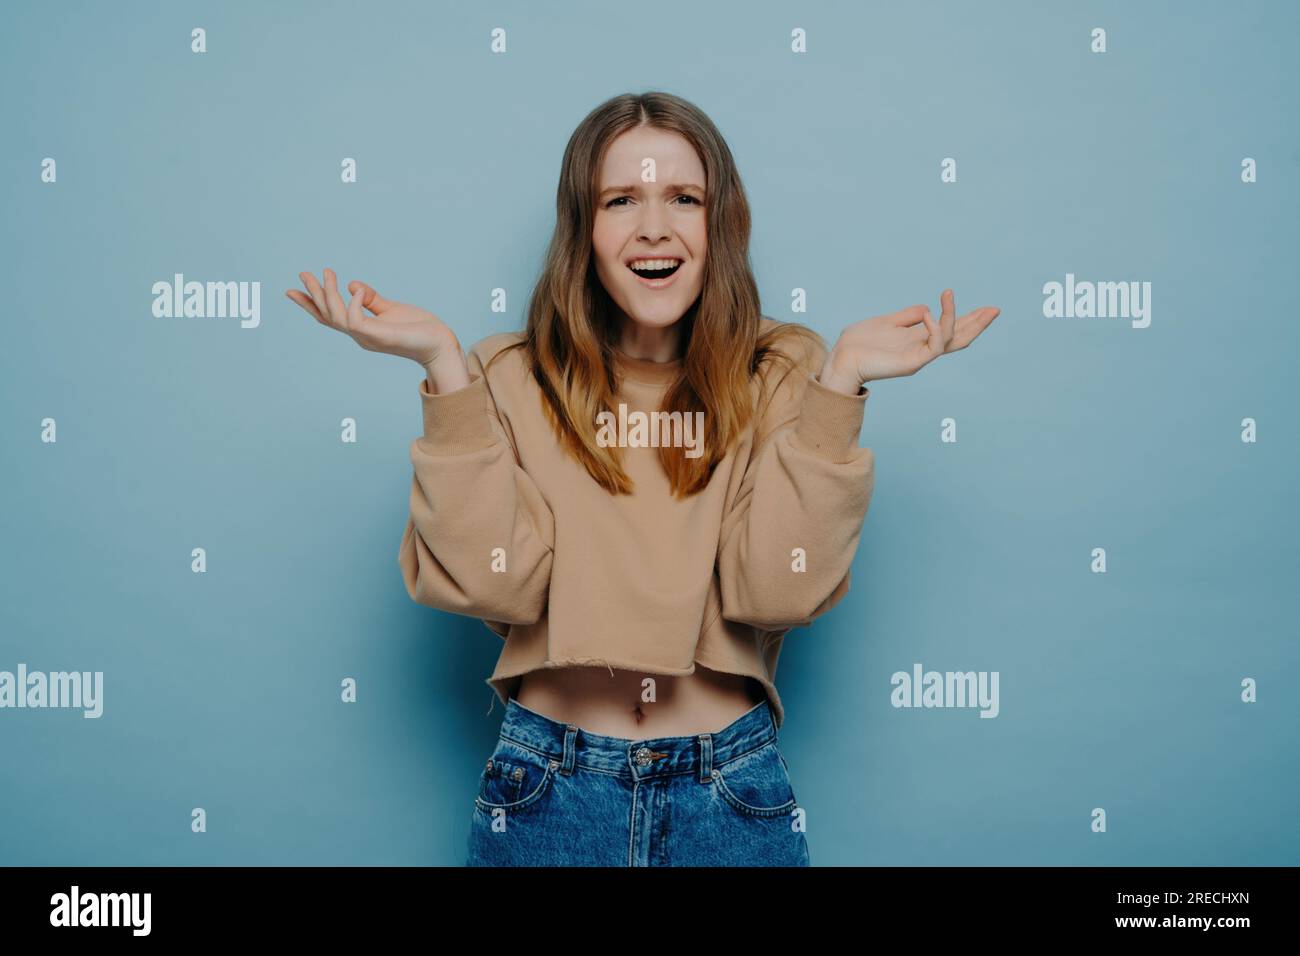 Studio shot of attractive amazed teenage girl in stylish casual outfit, cannot believe her eyes, shrugging shoulders with a surprised face expression, Stock Photo